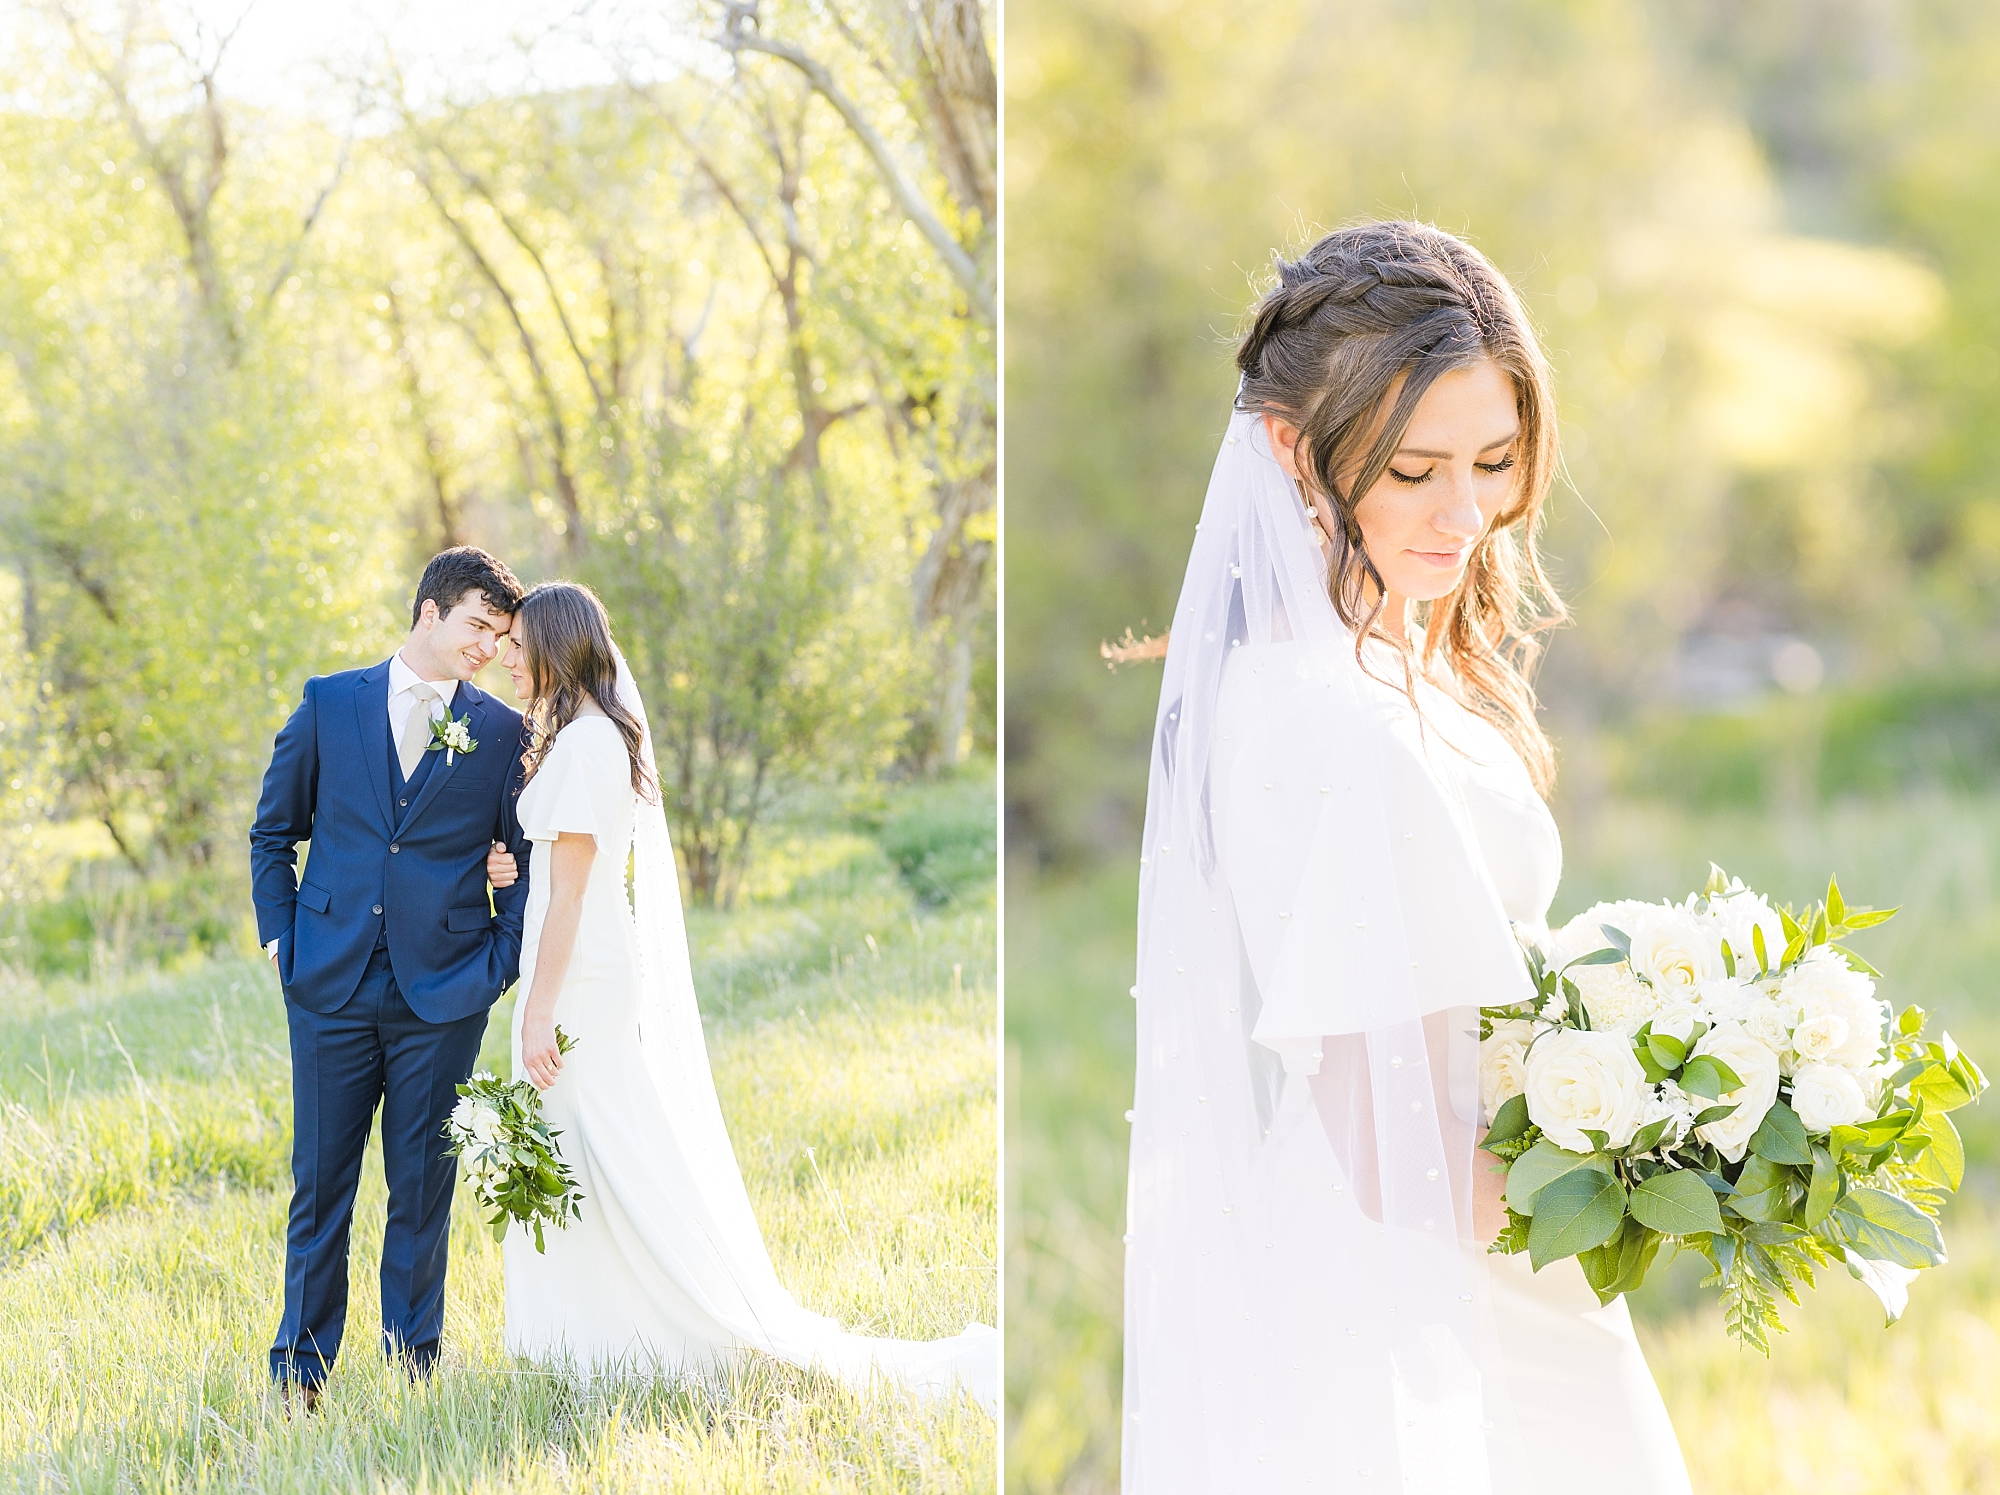 Classic and romantic wedding photography in Utah